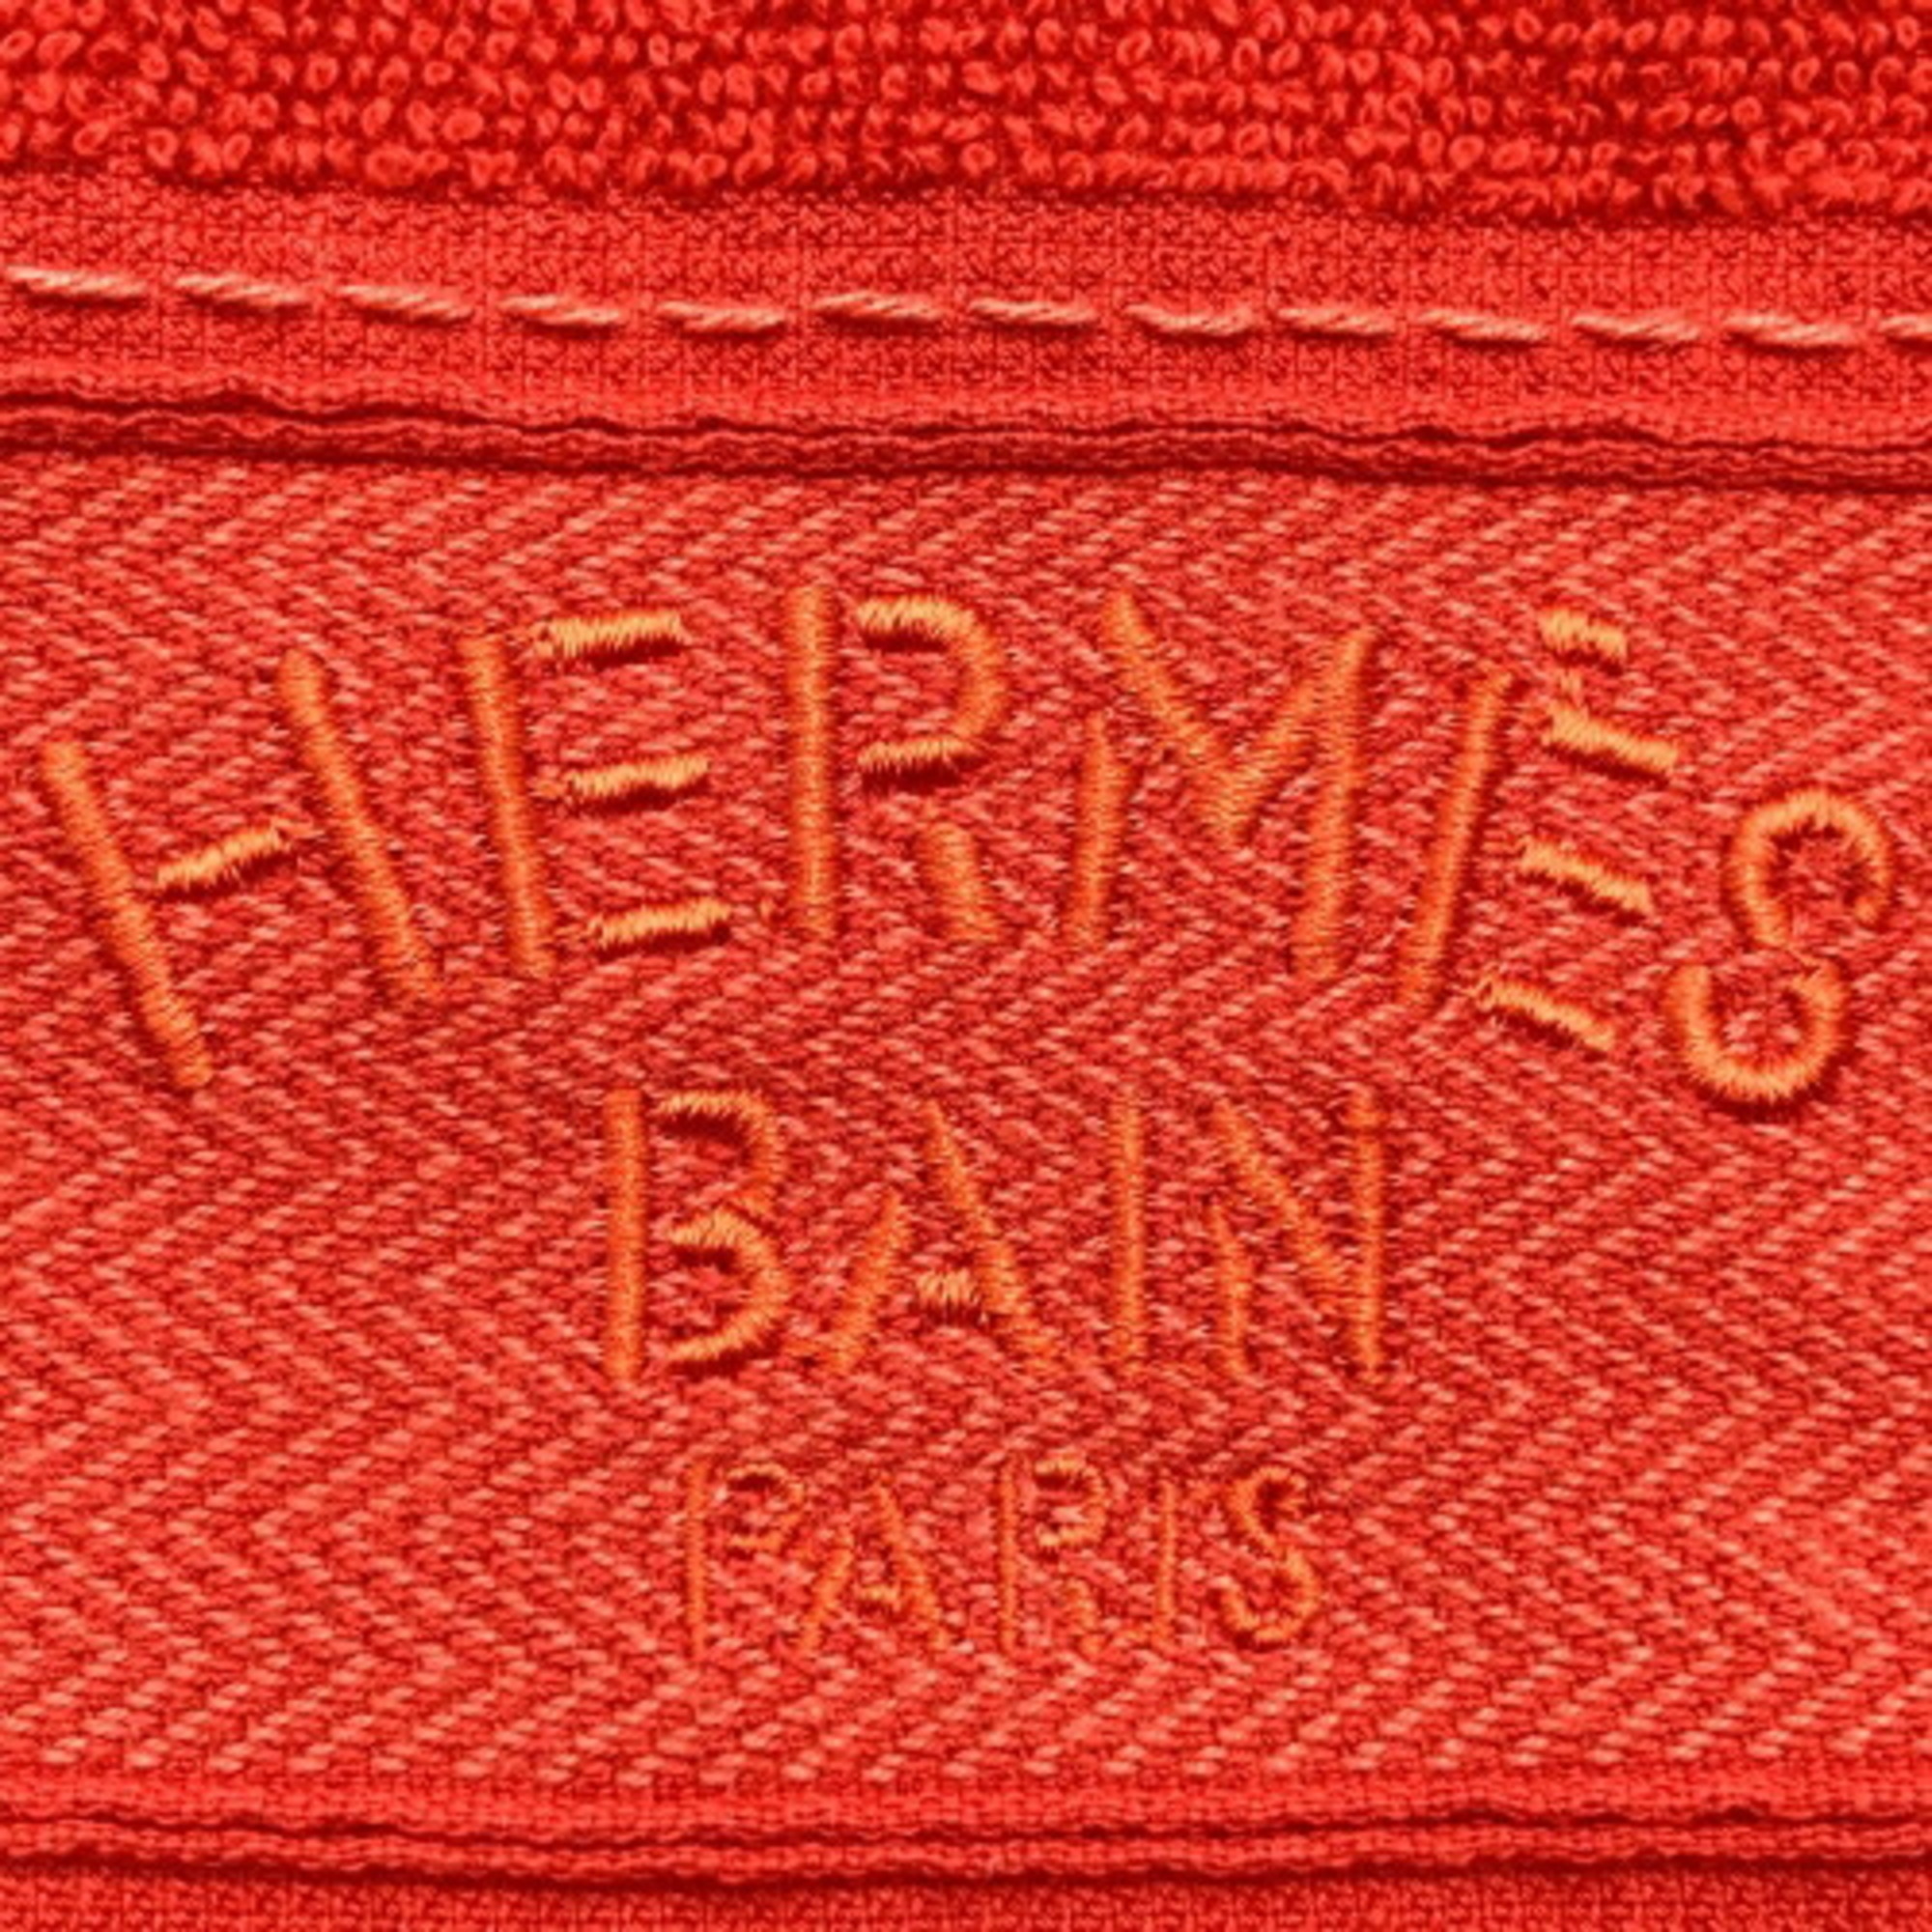 HERMES Blanket Towel Stole Red Cotton Women's Men's Accessories Fashion USED ITKYHW0WHBHS